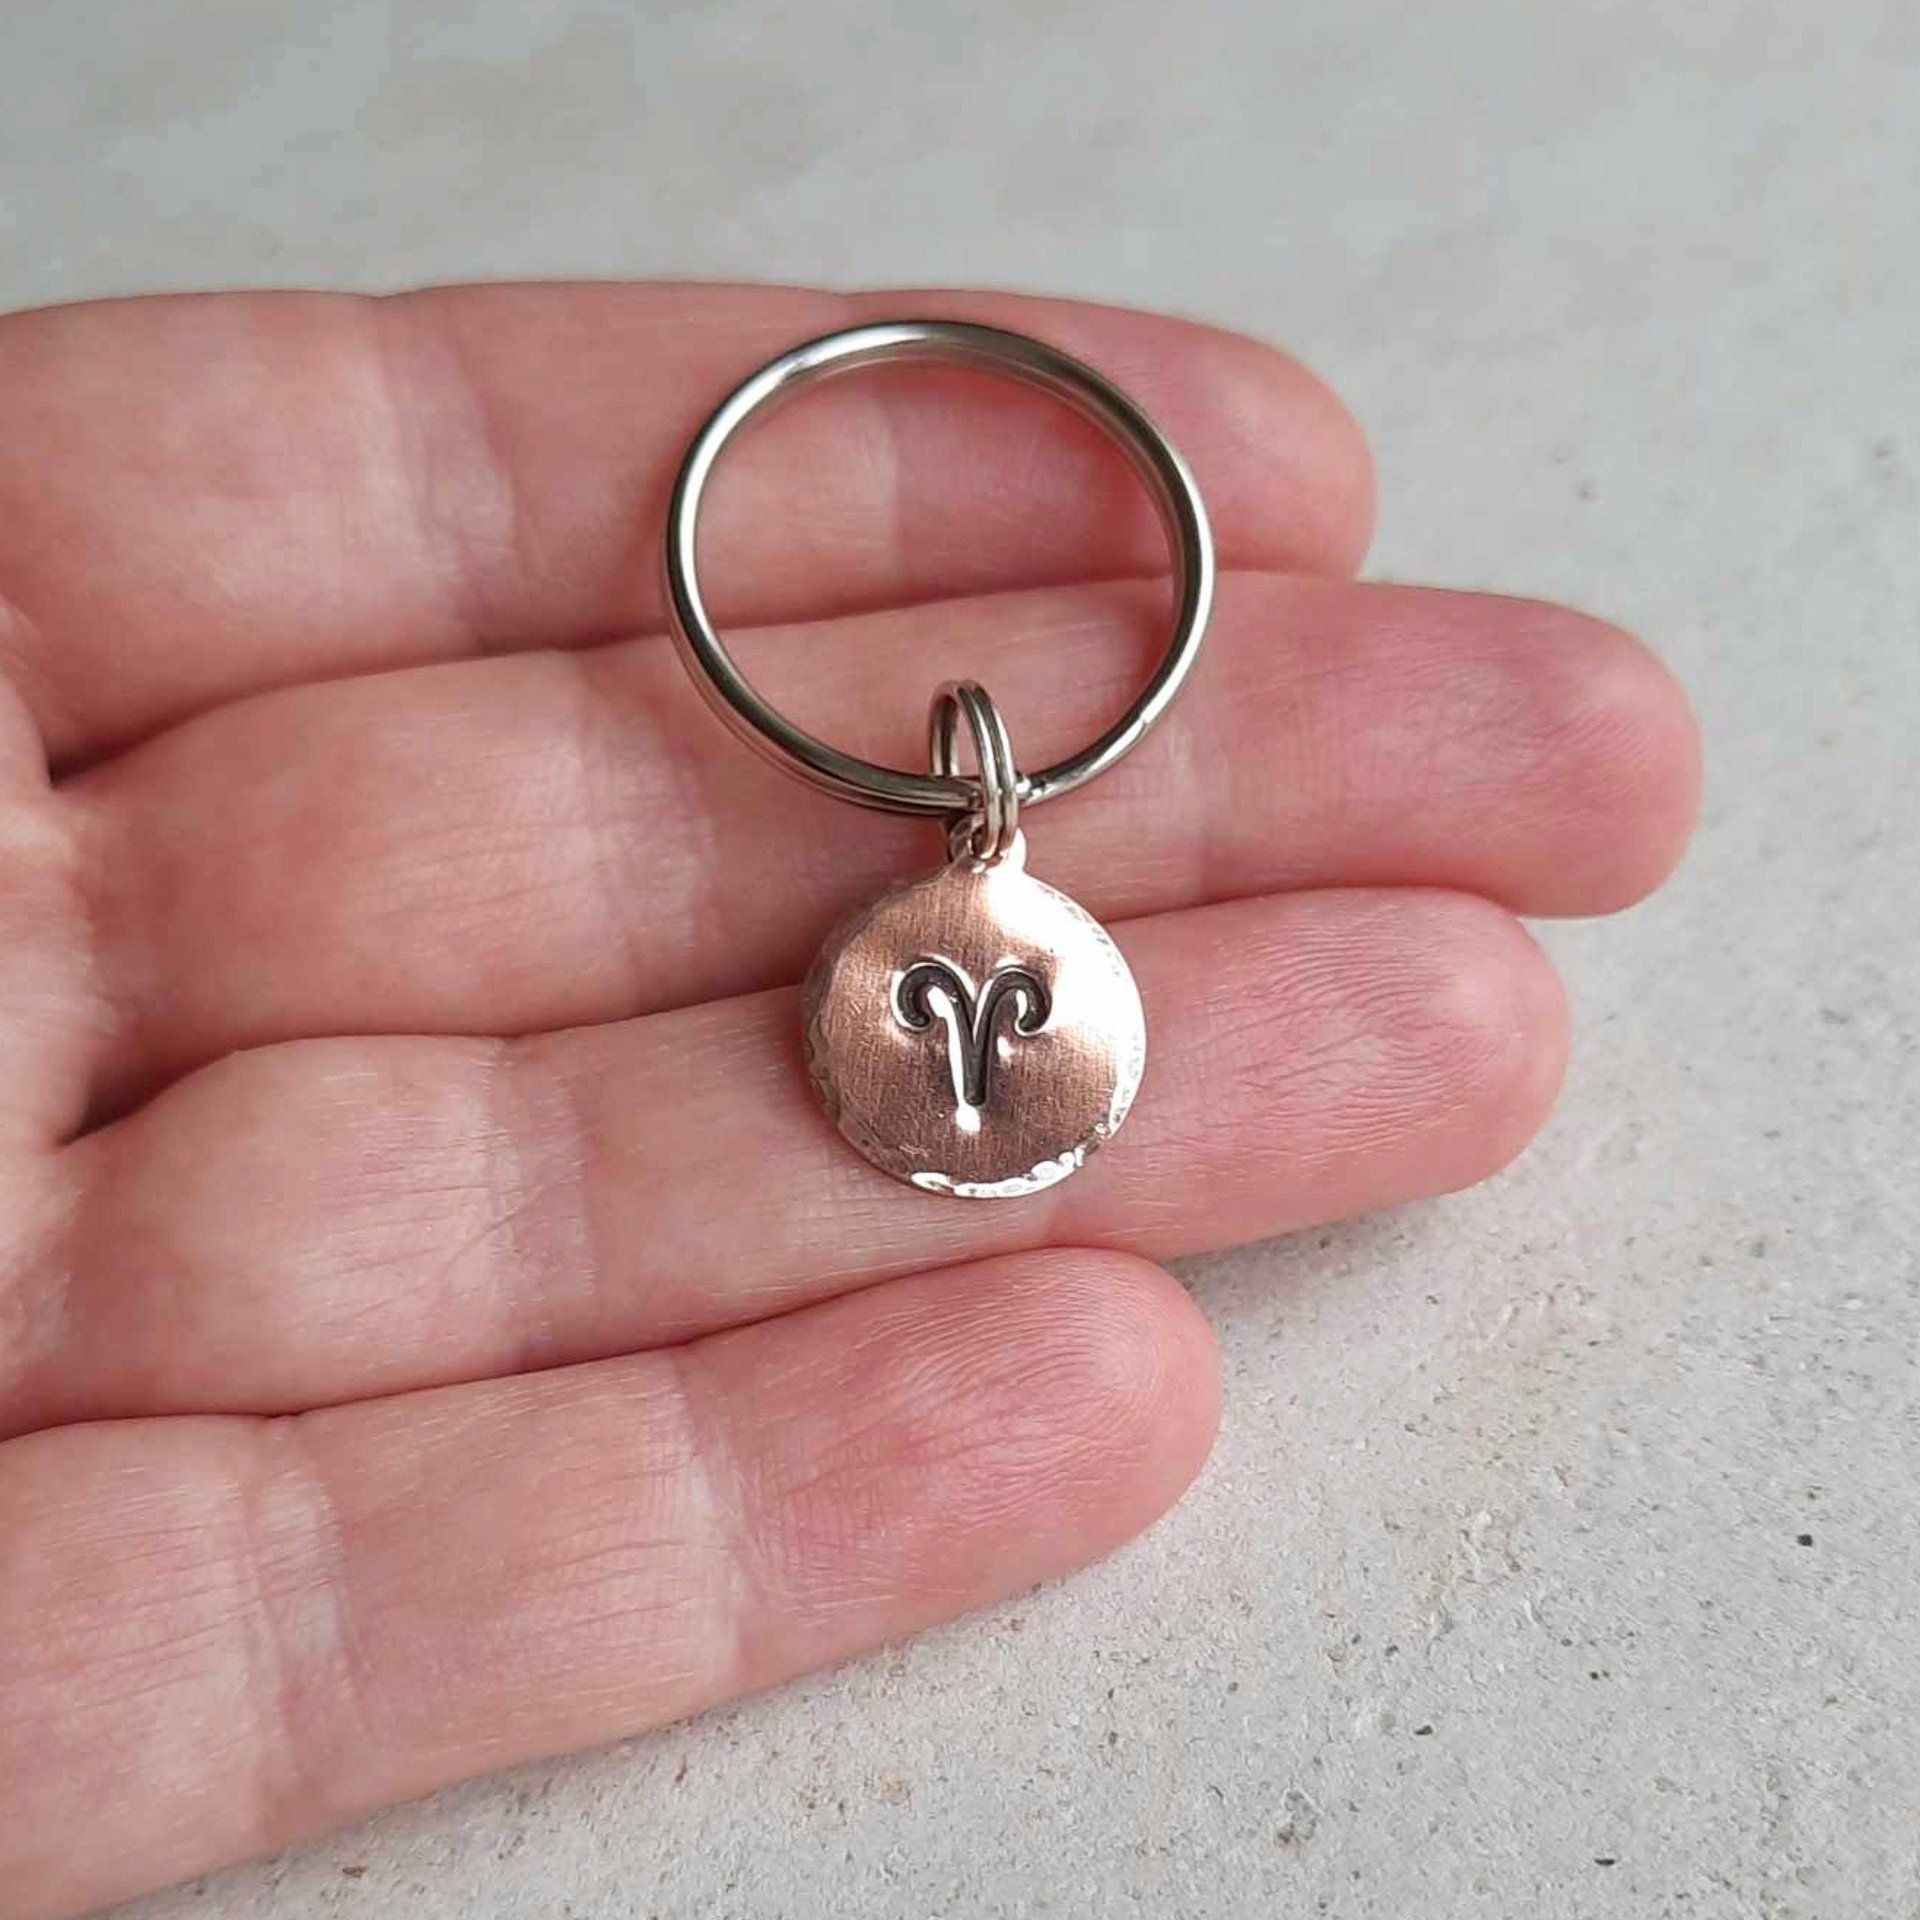 Handstamped copper Aries star sign keyring, hand made by The Tiny Tree Frog Jewellery